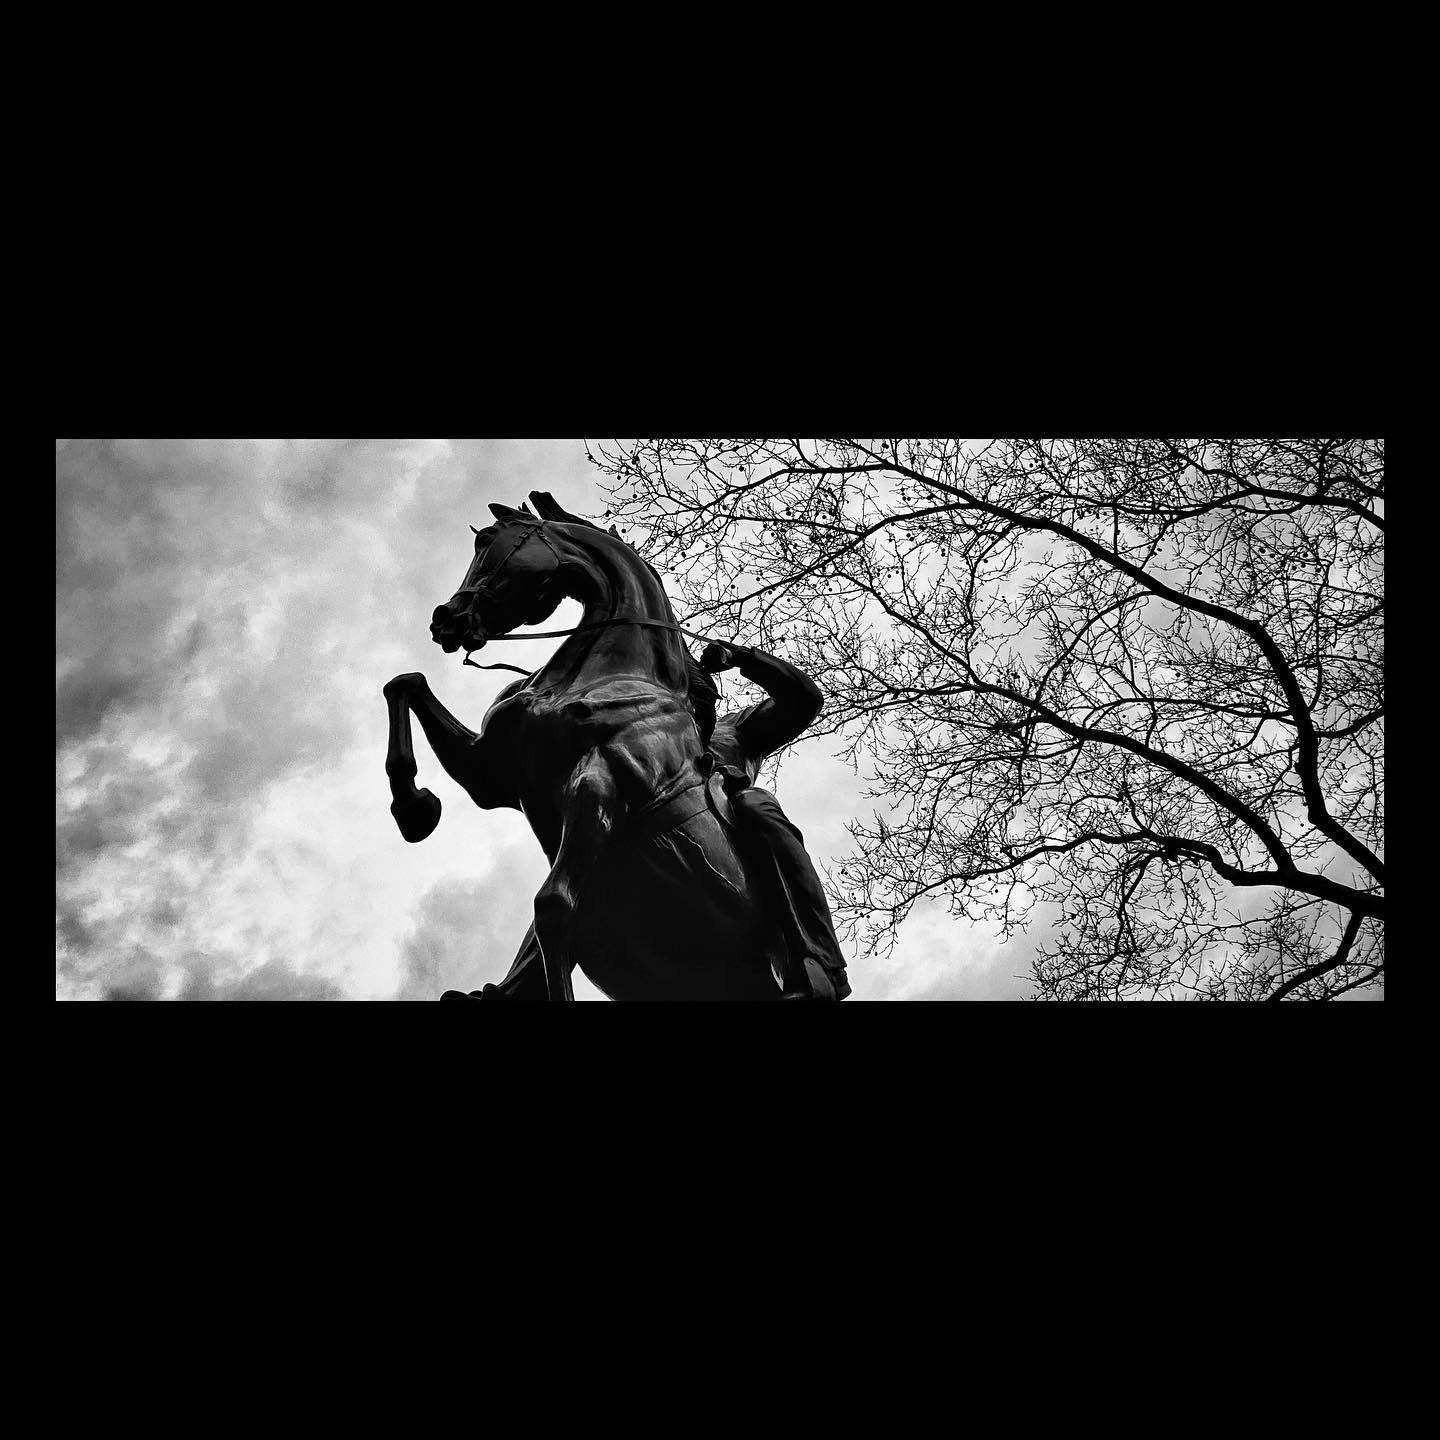 Trying something new... #horse #bw #blackandwhite #statue #centralpark #branches #newyorkcity #clouds #moment #momentlens #momentanamorphic #lookingup